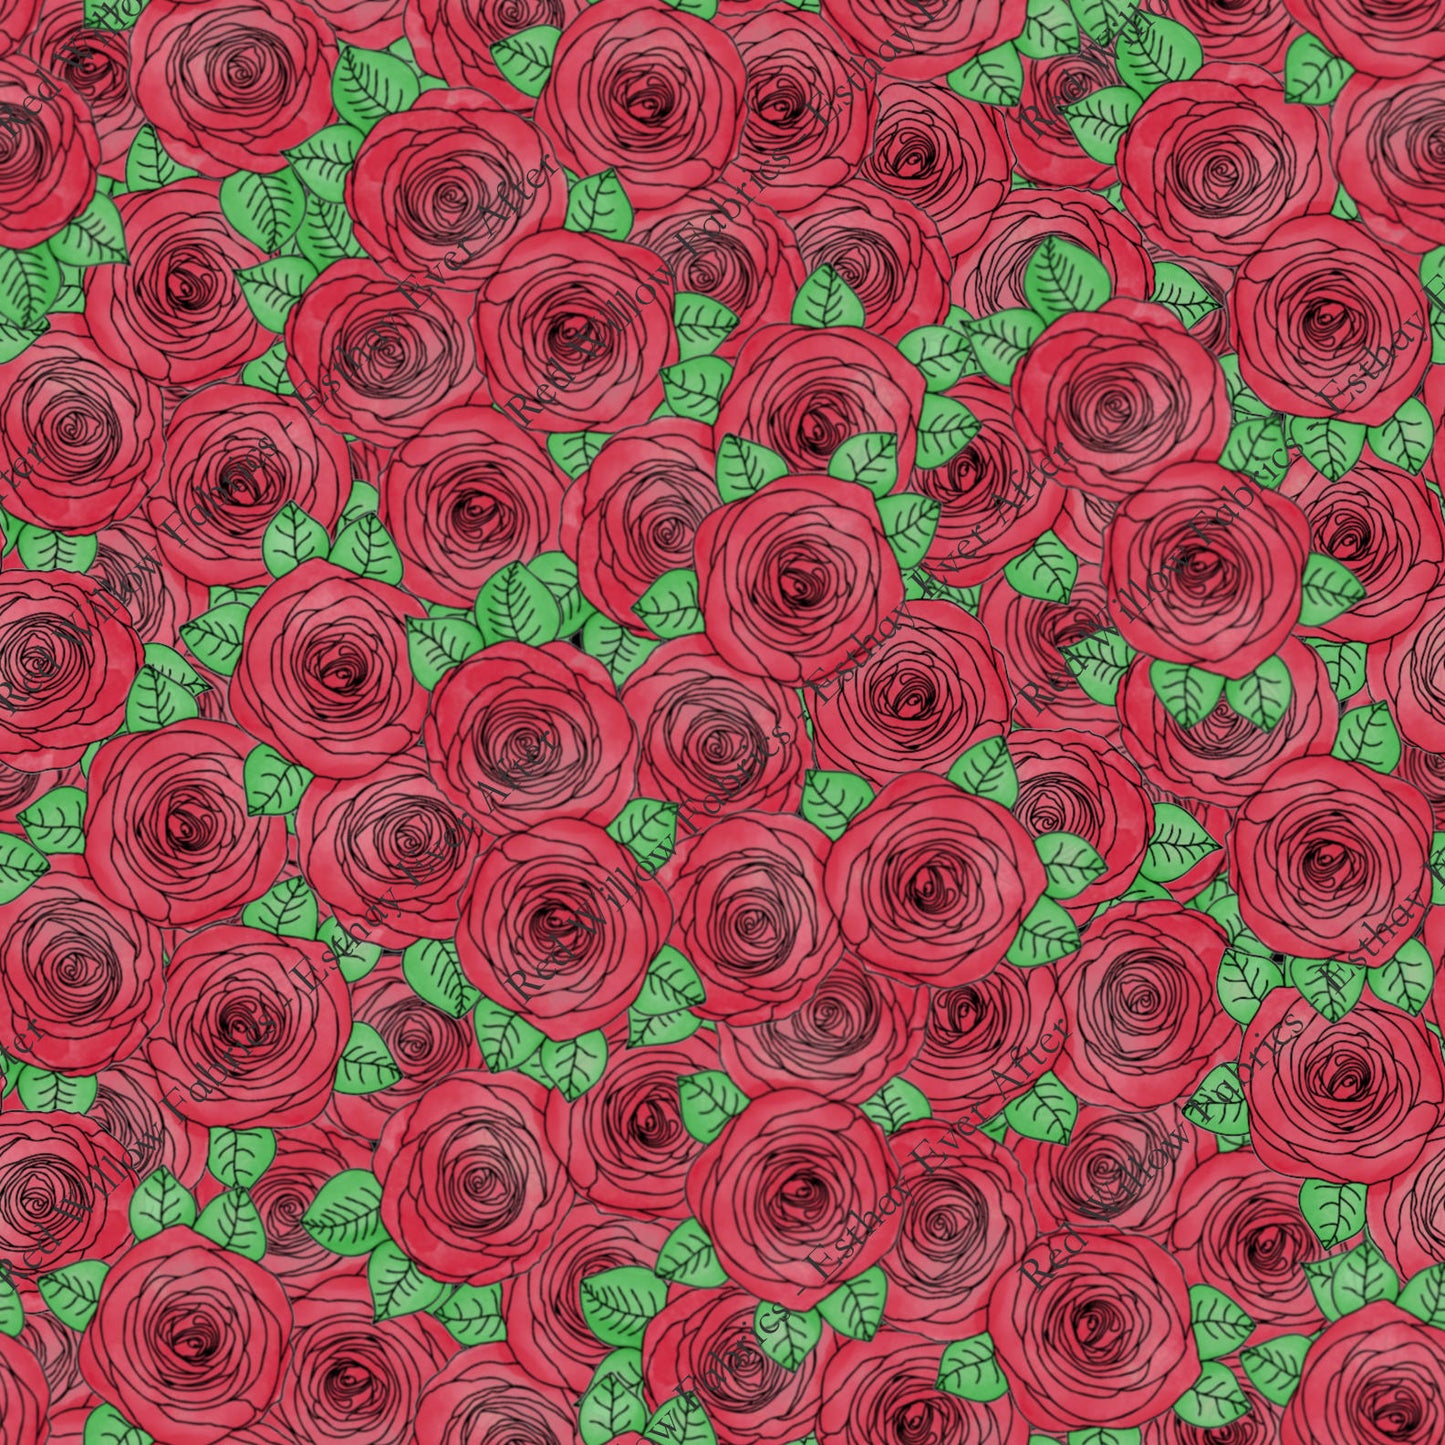 EEA - Crowded Watercolor Roses Red